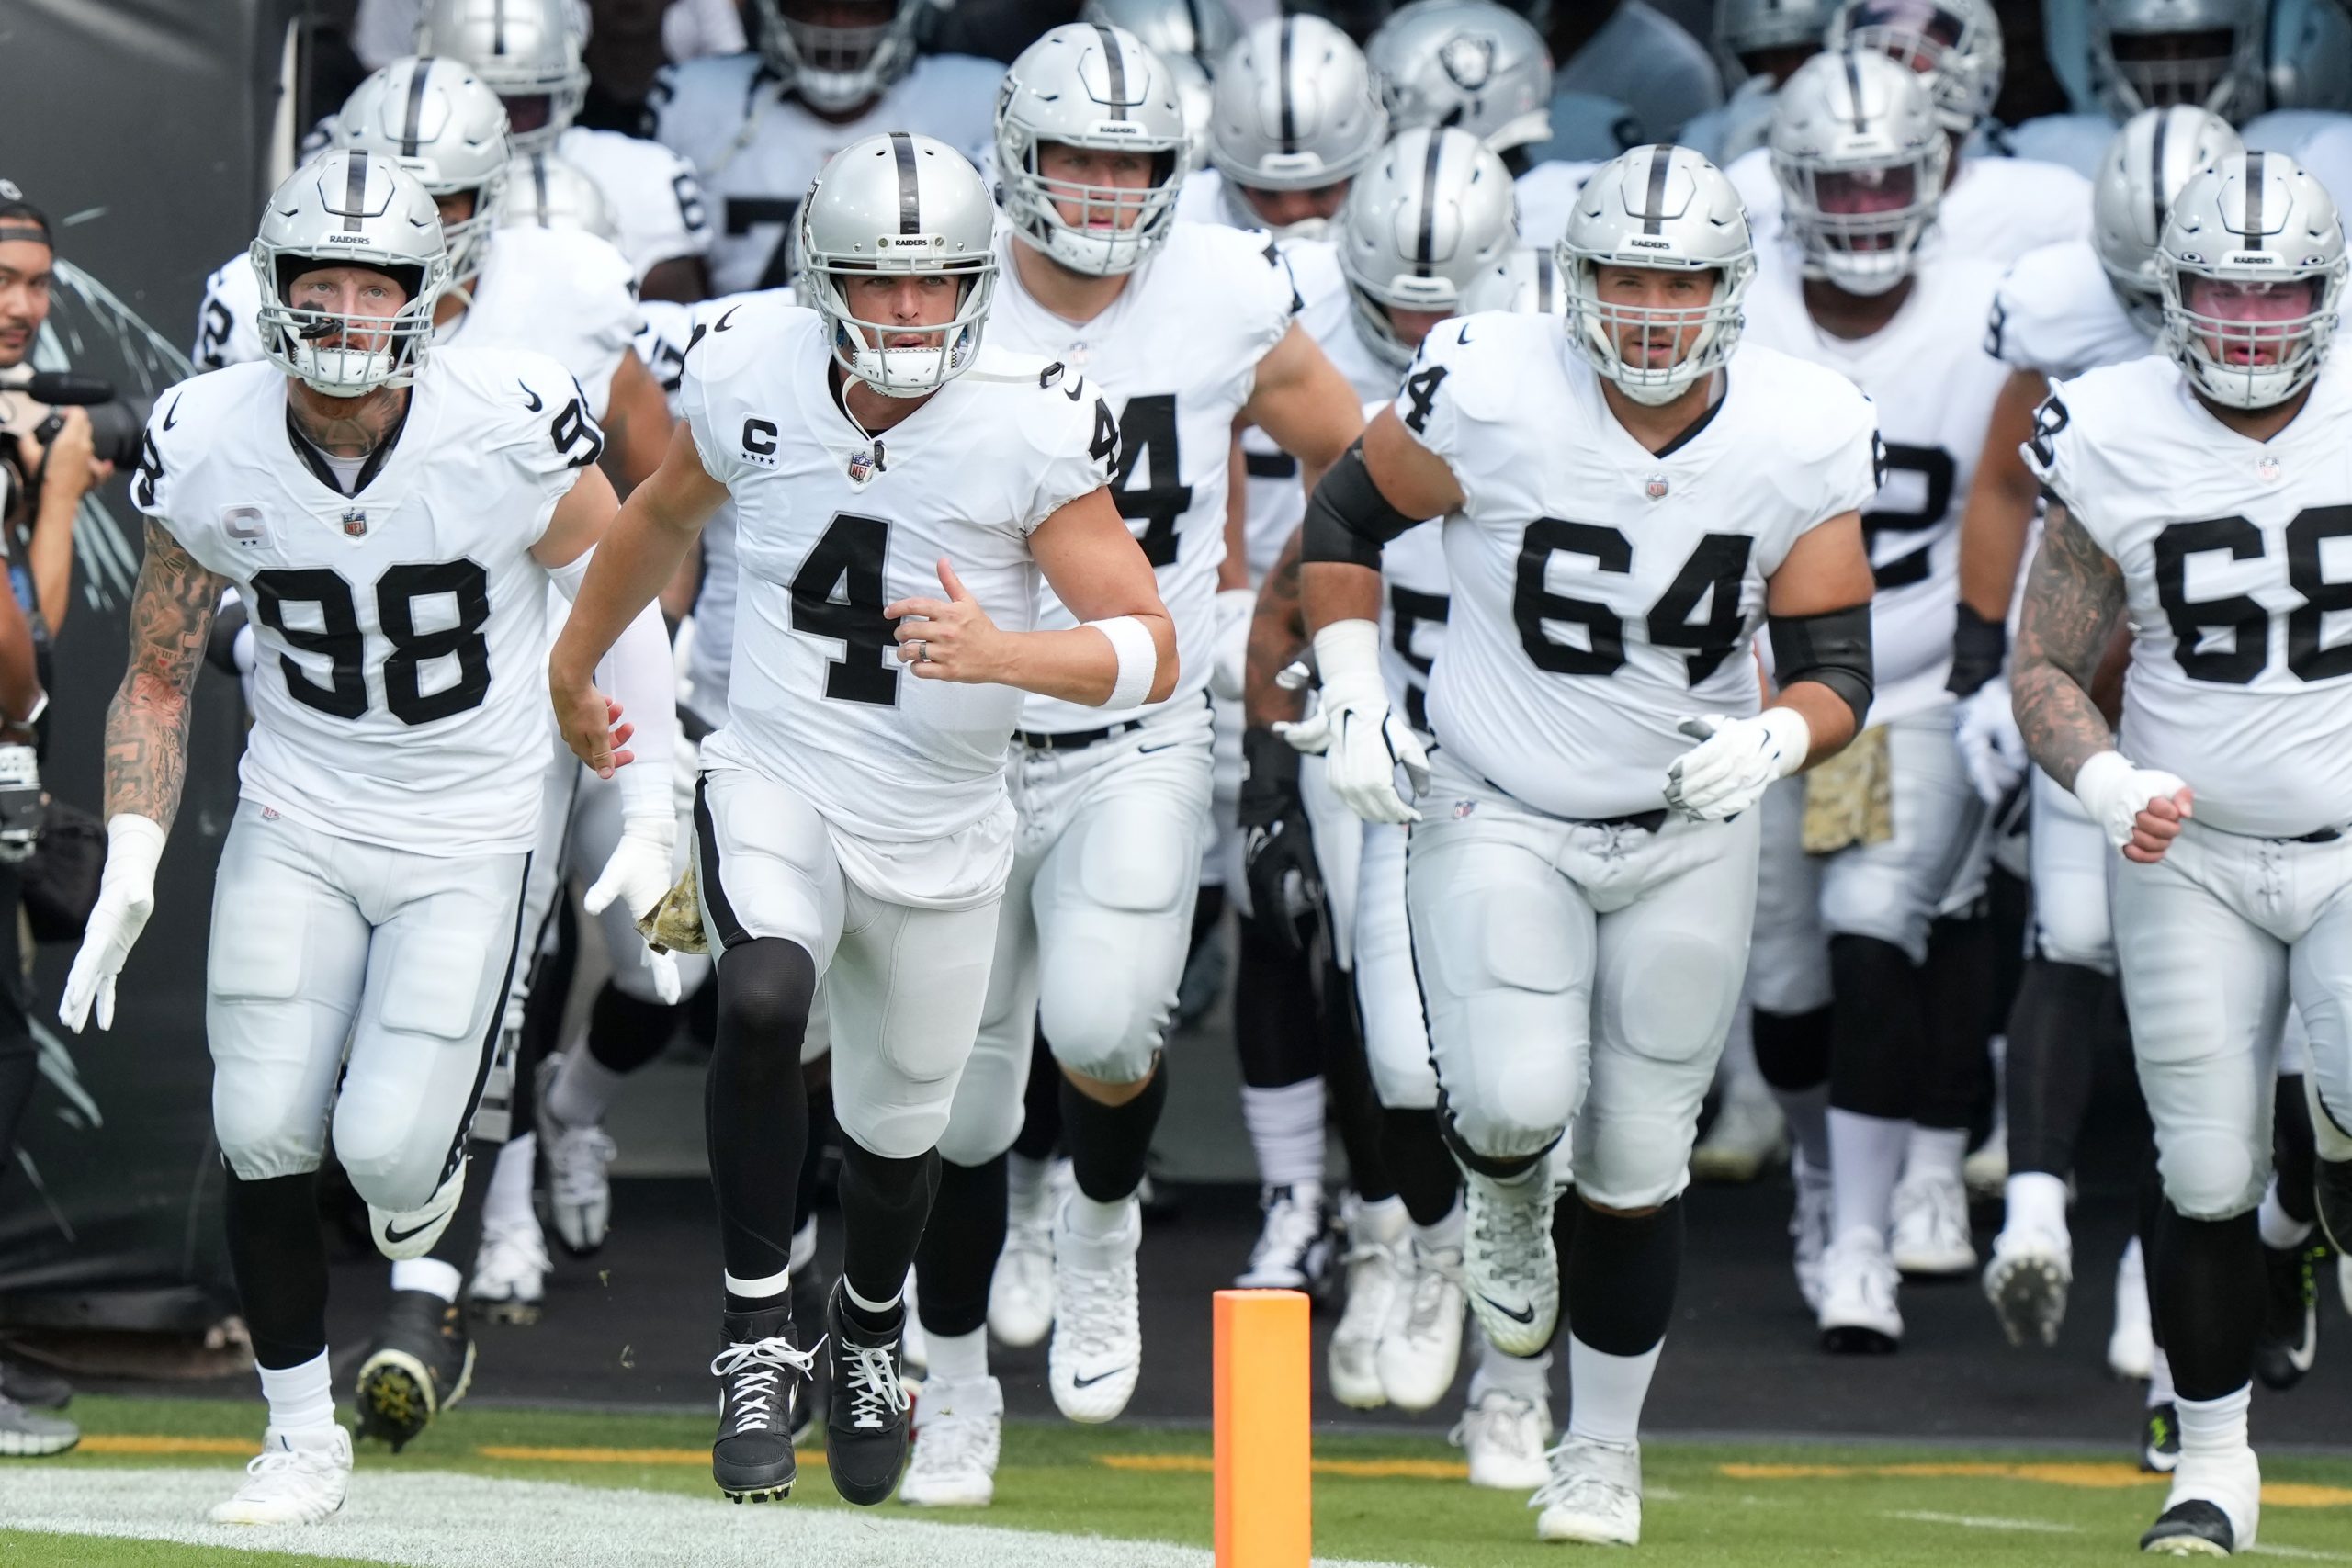 How To Watch Raiders vs. Colts Week 10: TV Channel, Start Time